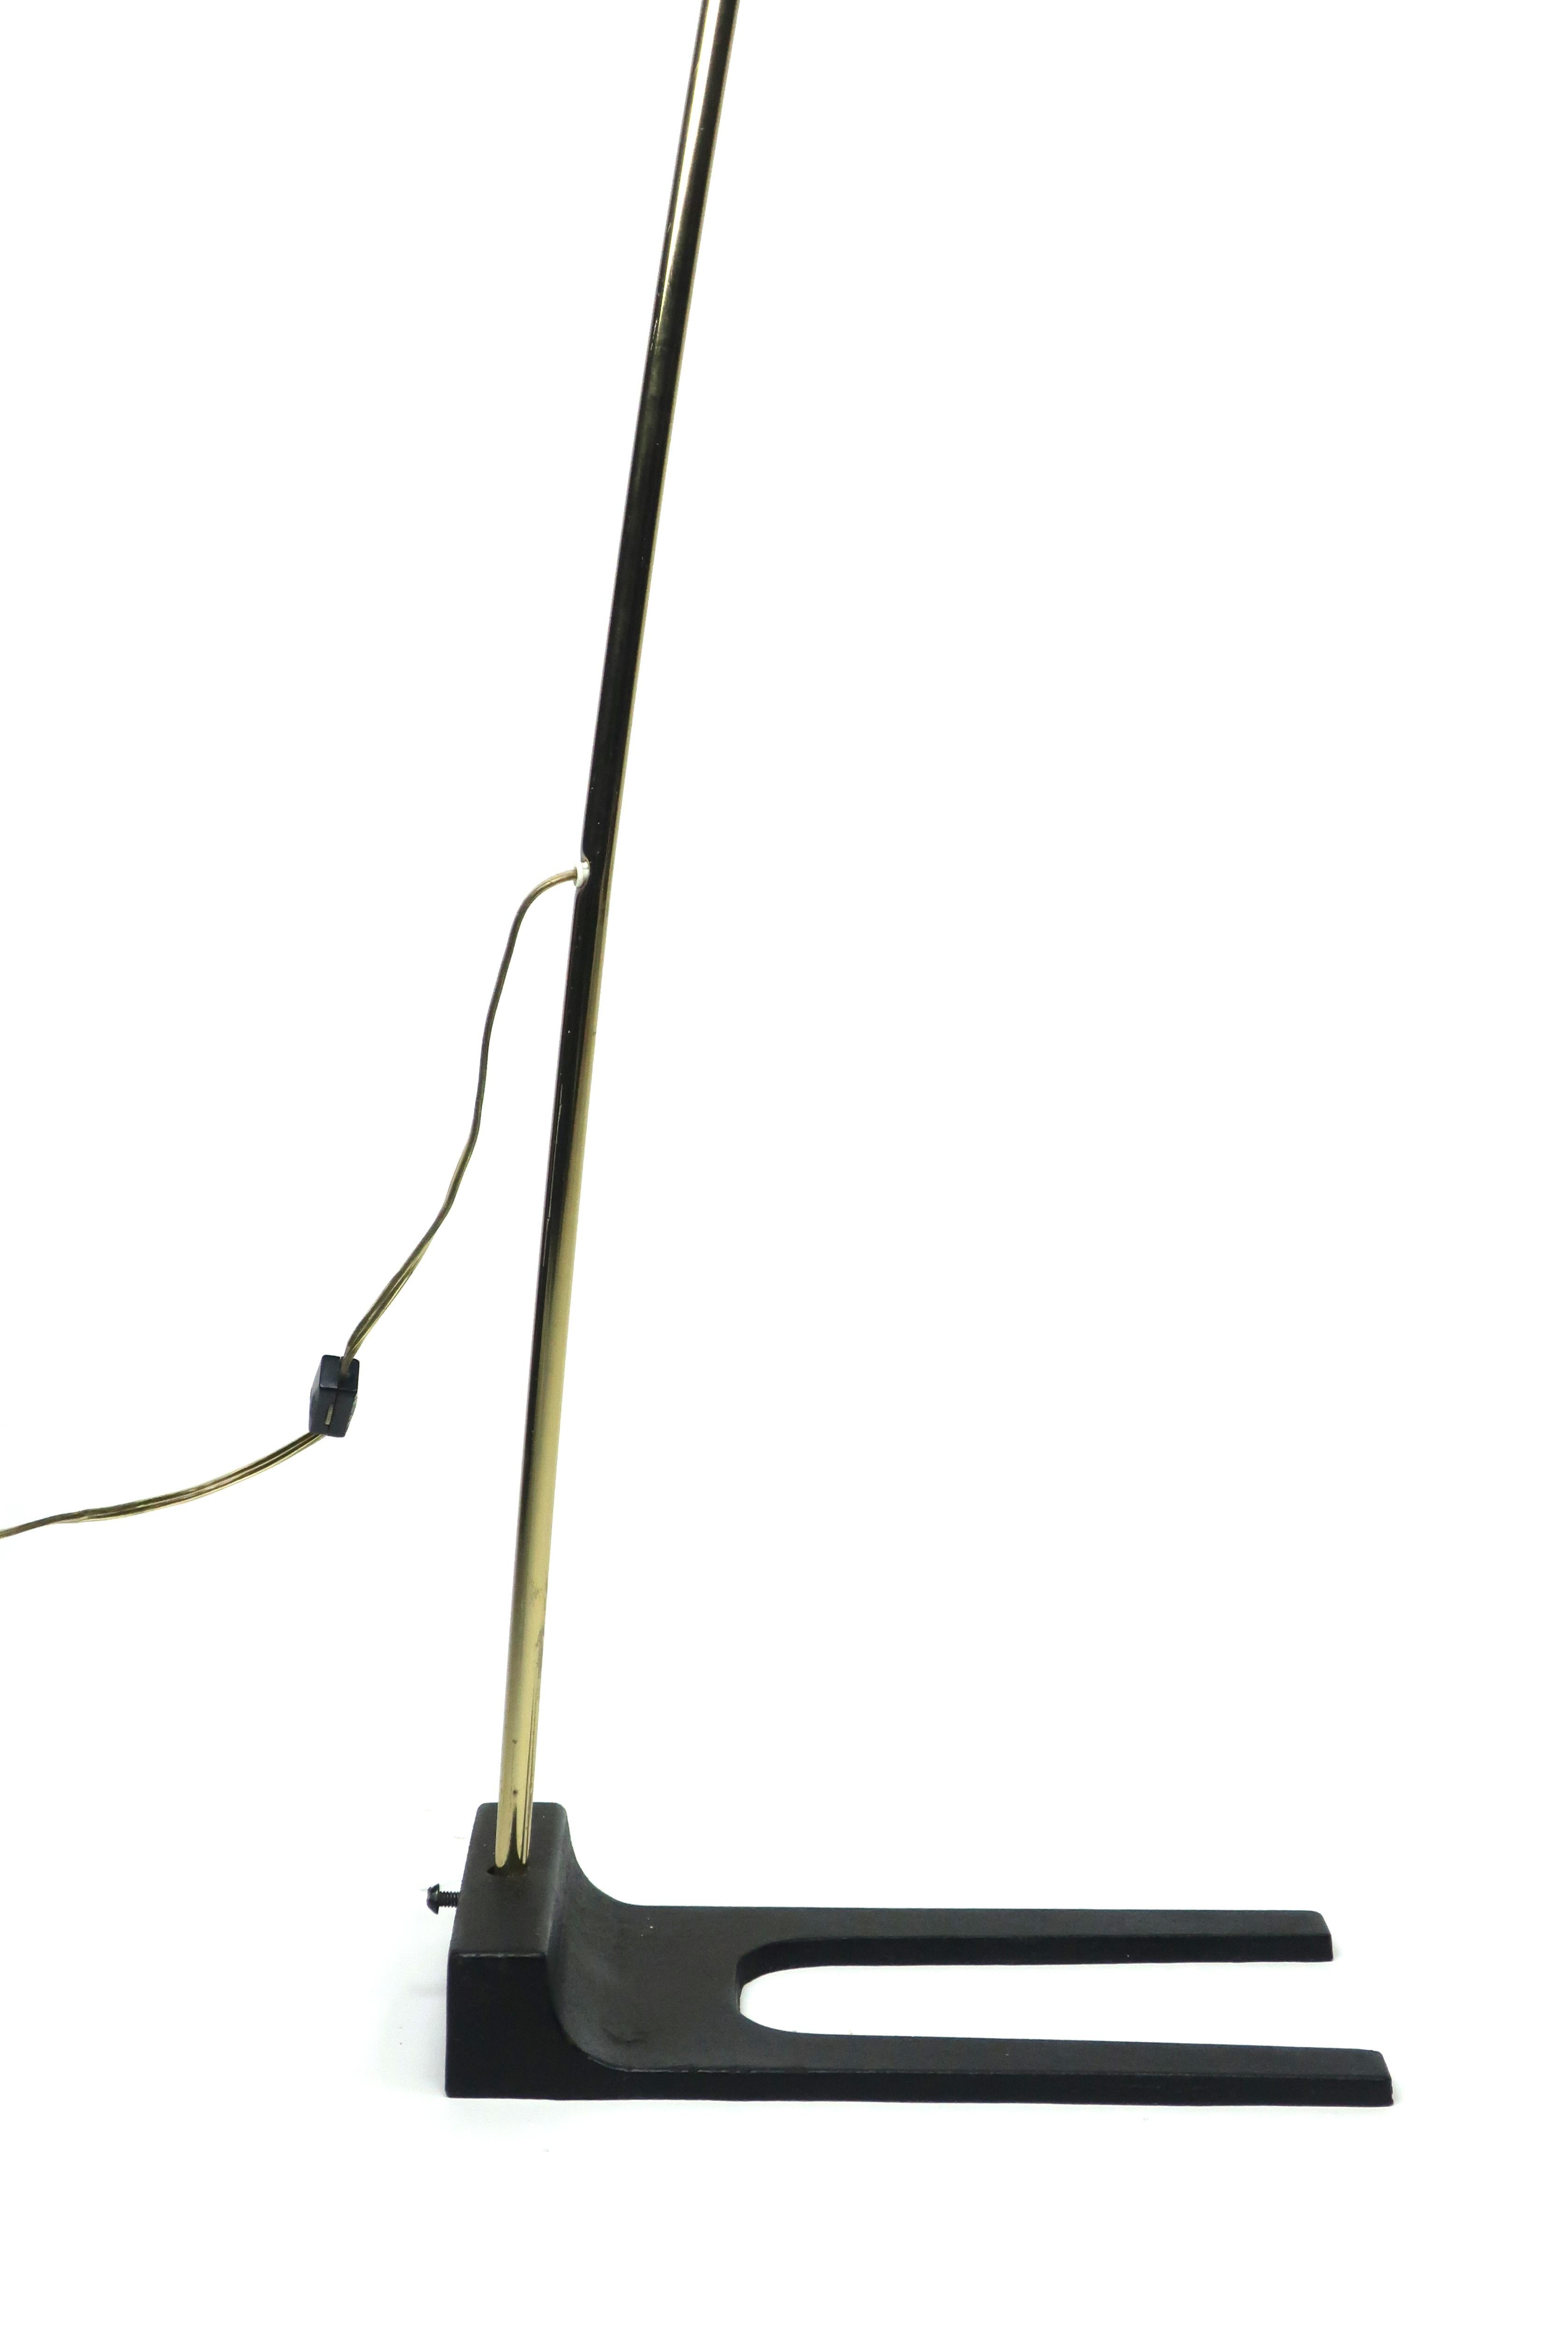 Known for Italian modern-inspired design and unusual shapes, Clover Lamp Company designed high quality commercial and residential lighting in the 1960s, 1970s, and 1980s.

This arc lamp has a cast iron base, brass arced stem, and black shade with